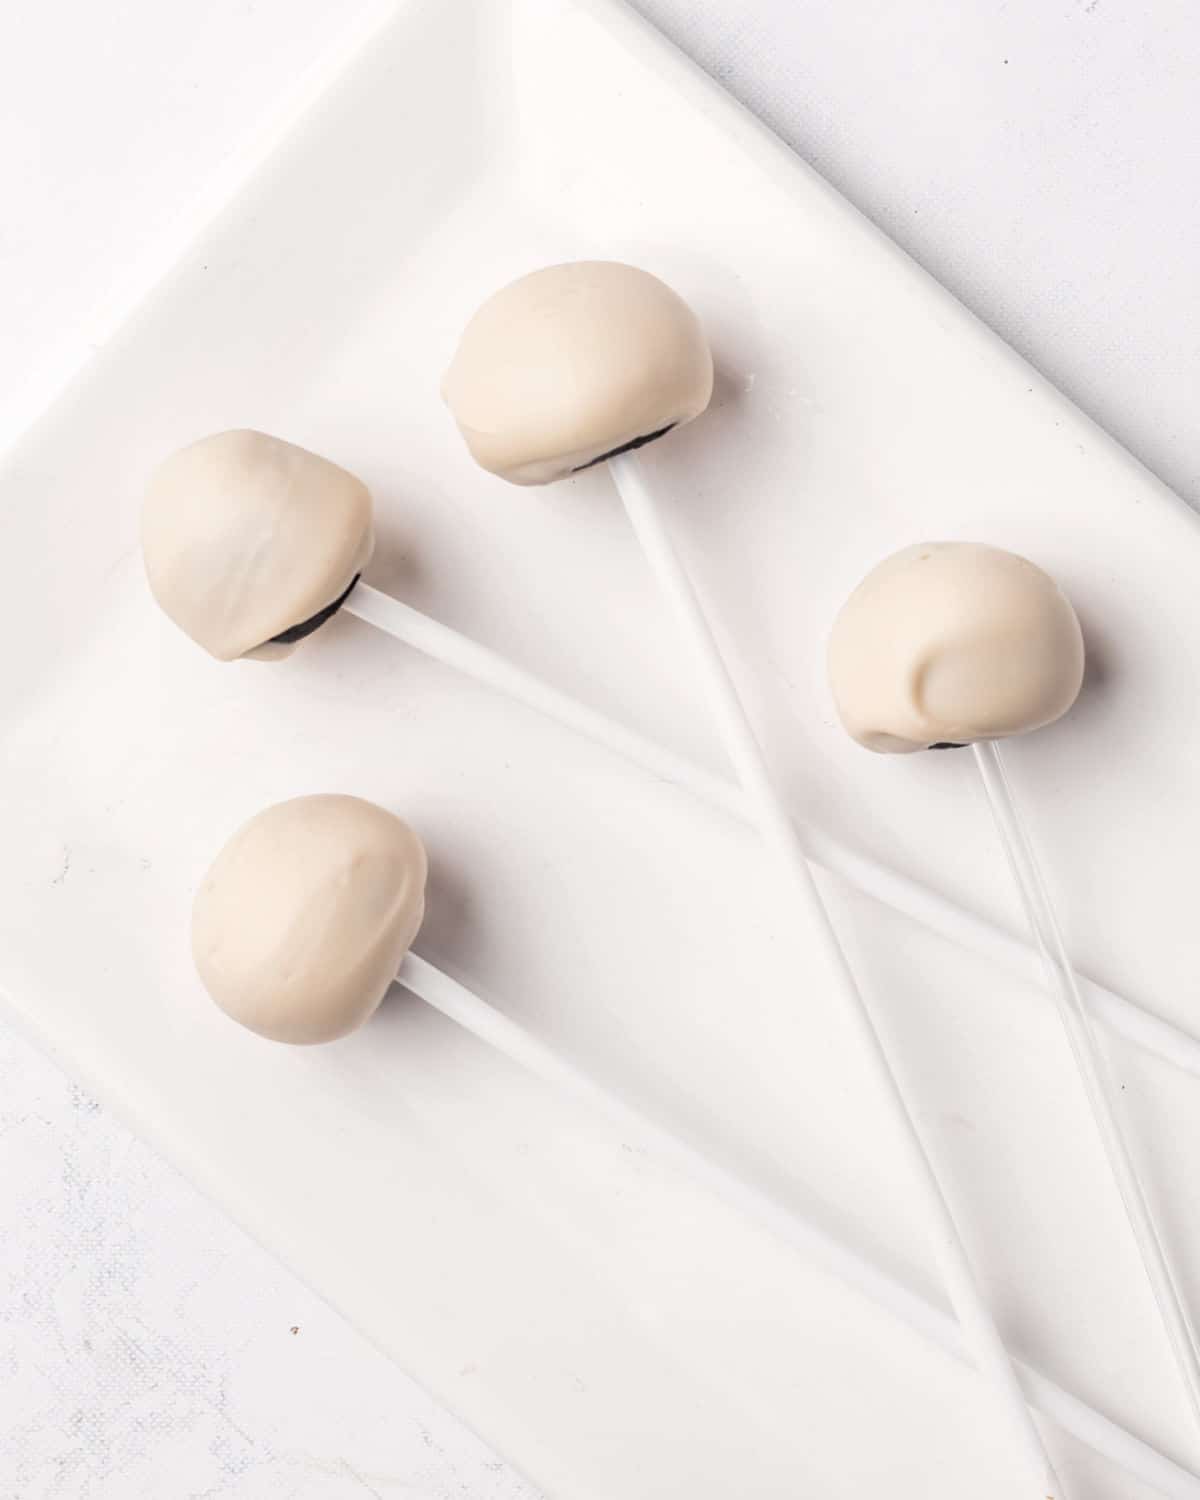 Four white chocolate covered cake pops on a white tray.